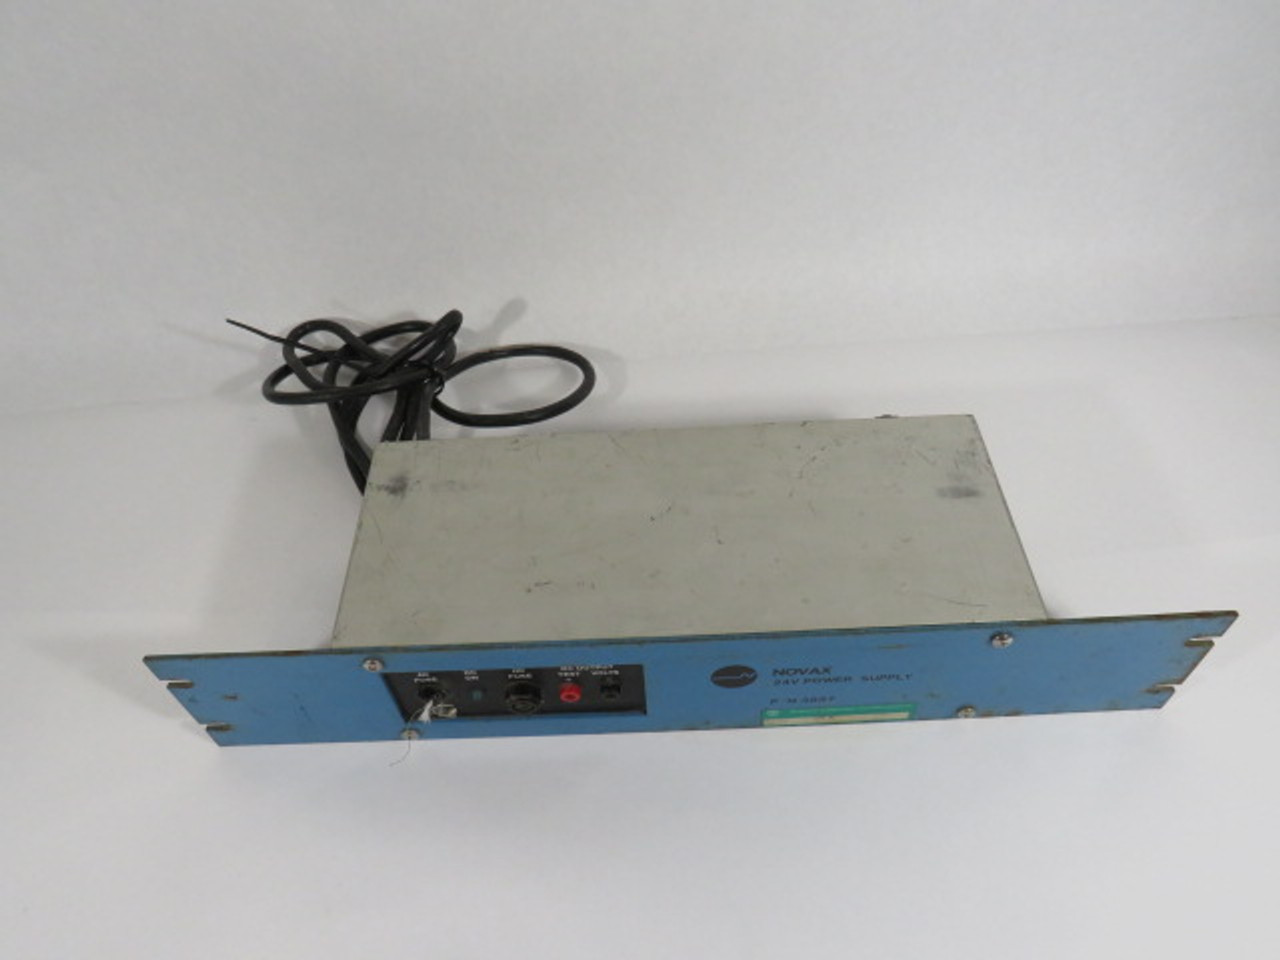 Novax 3857 Fused Power Supply 24VDC *No Power, Some Damage* ! AS IS !